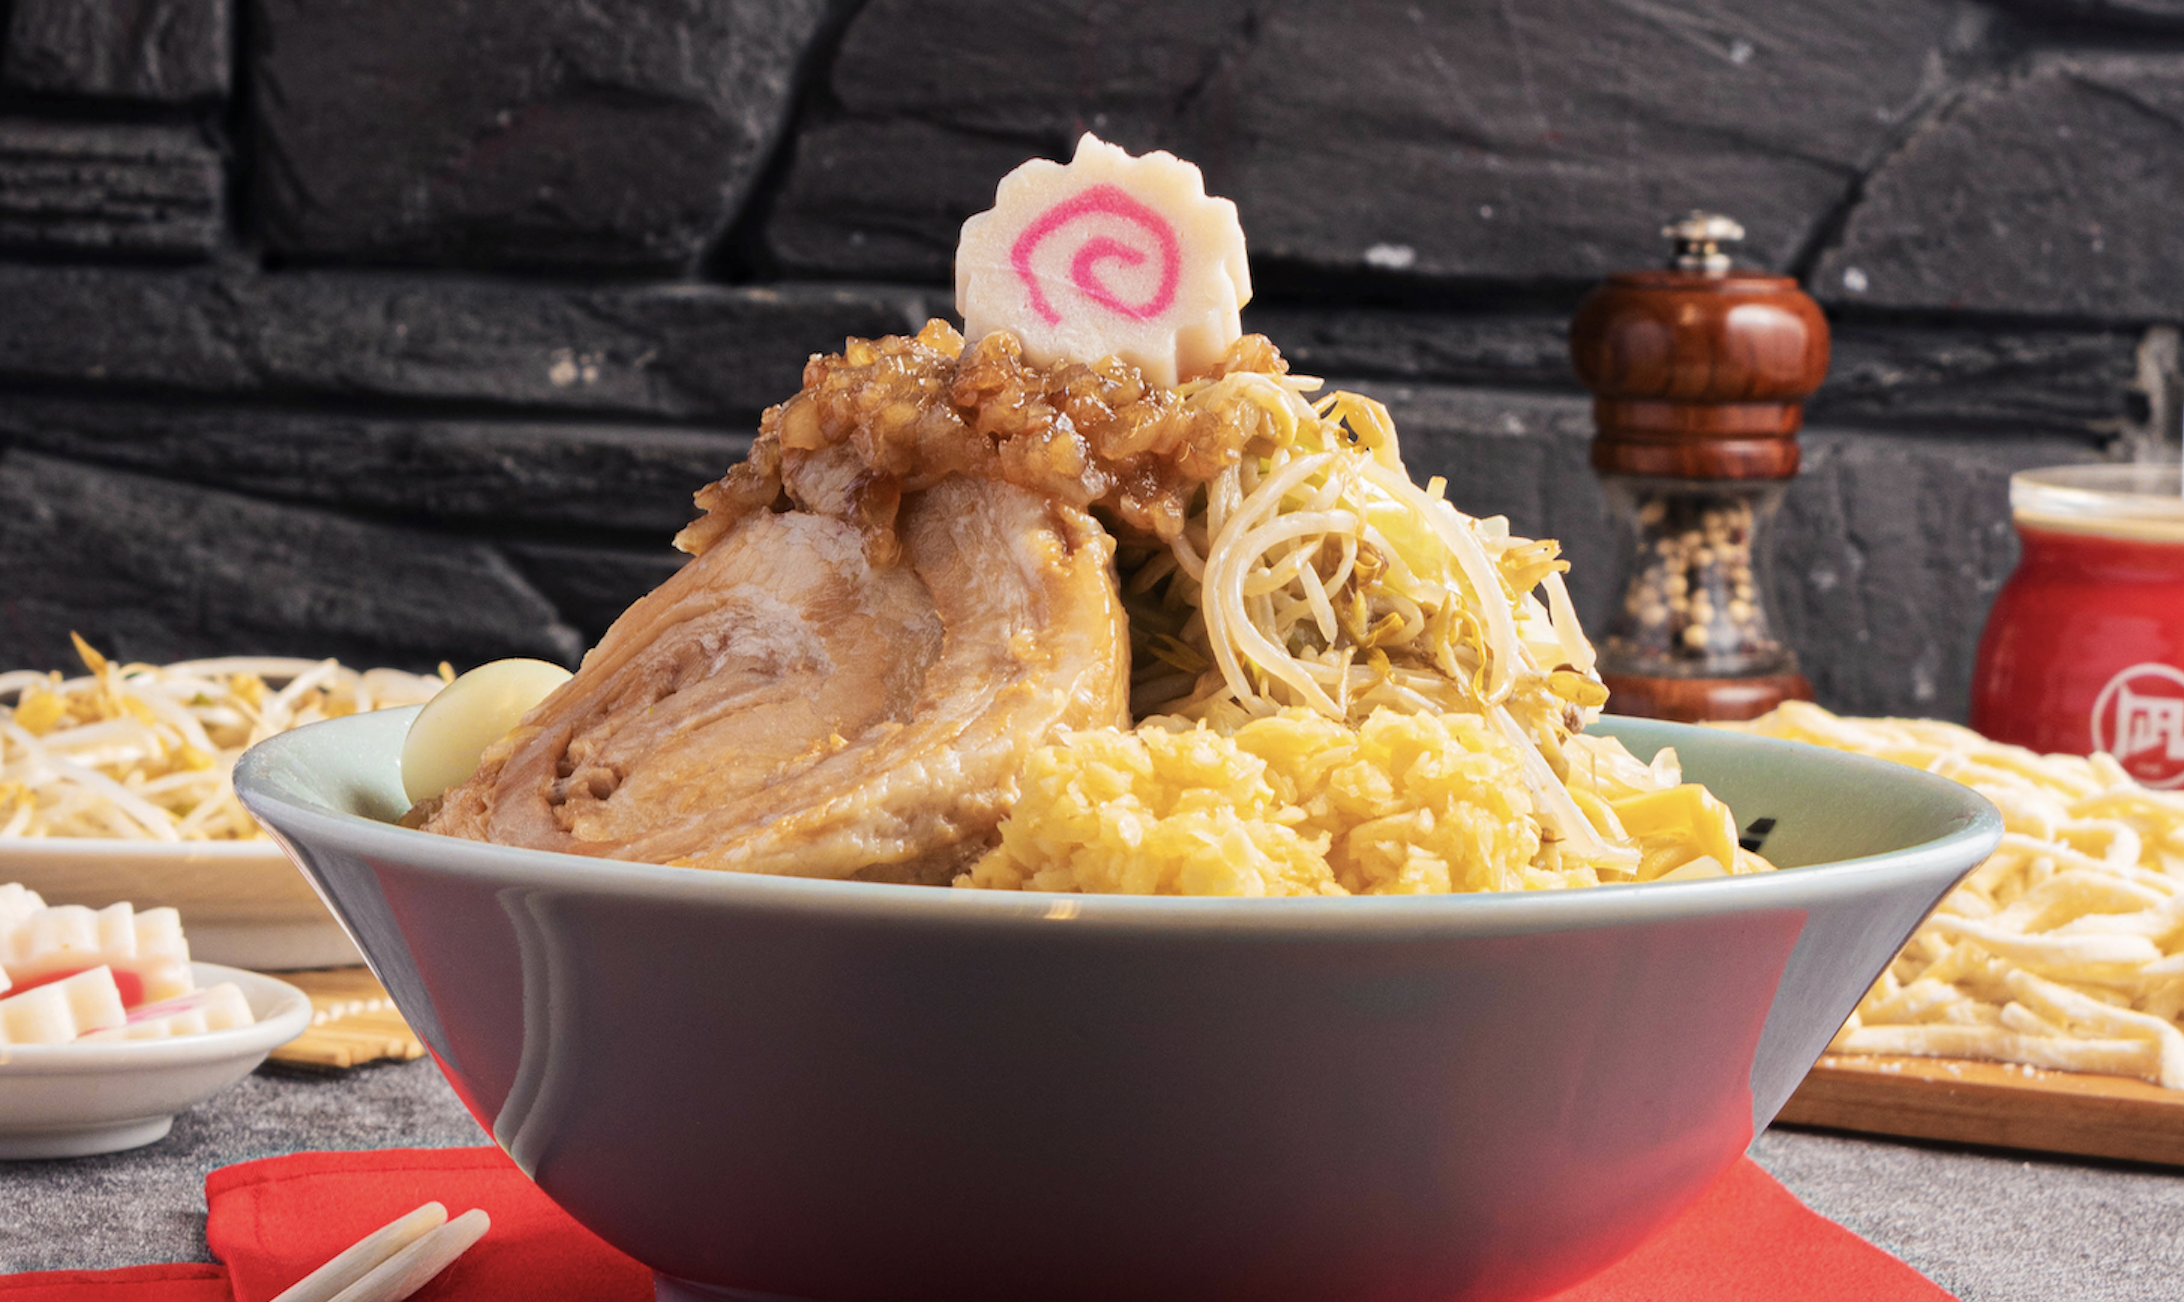 The Ramen Nagi X Ramen No. 11 collab is up for grabs starting today